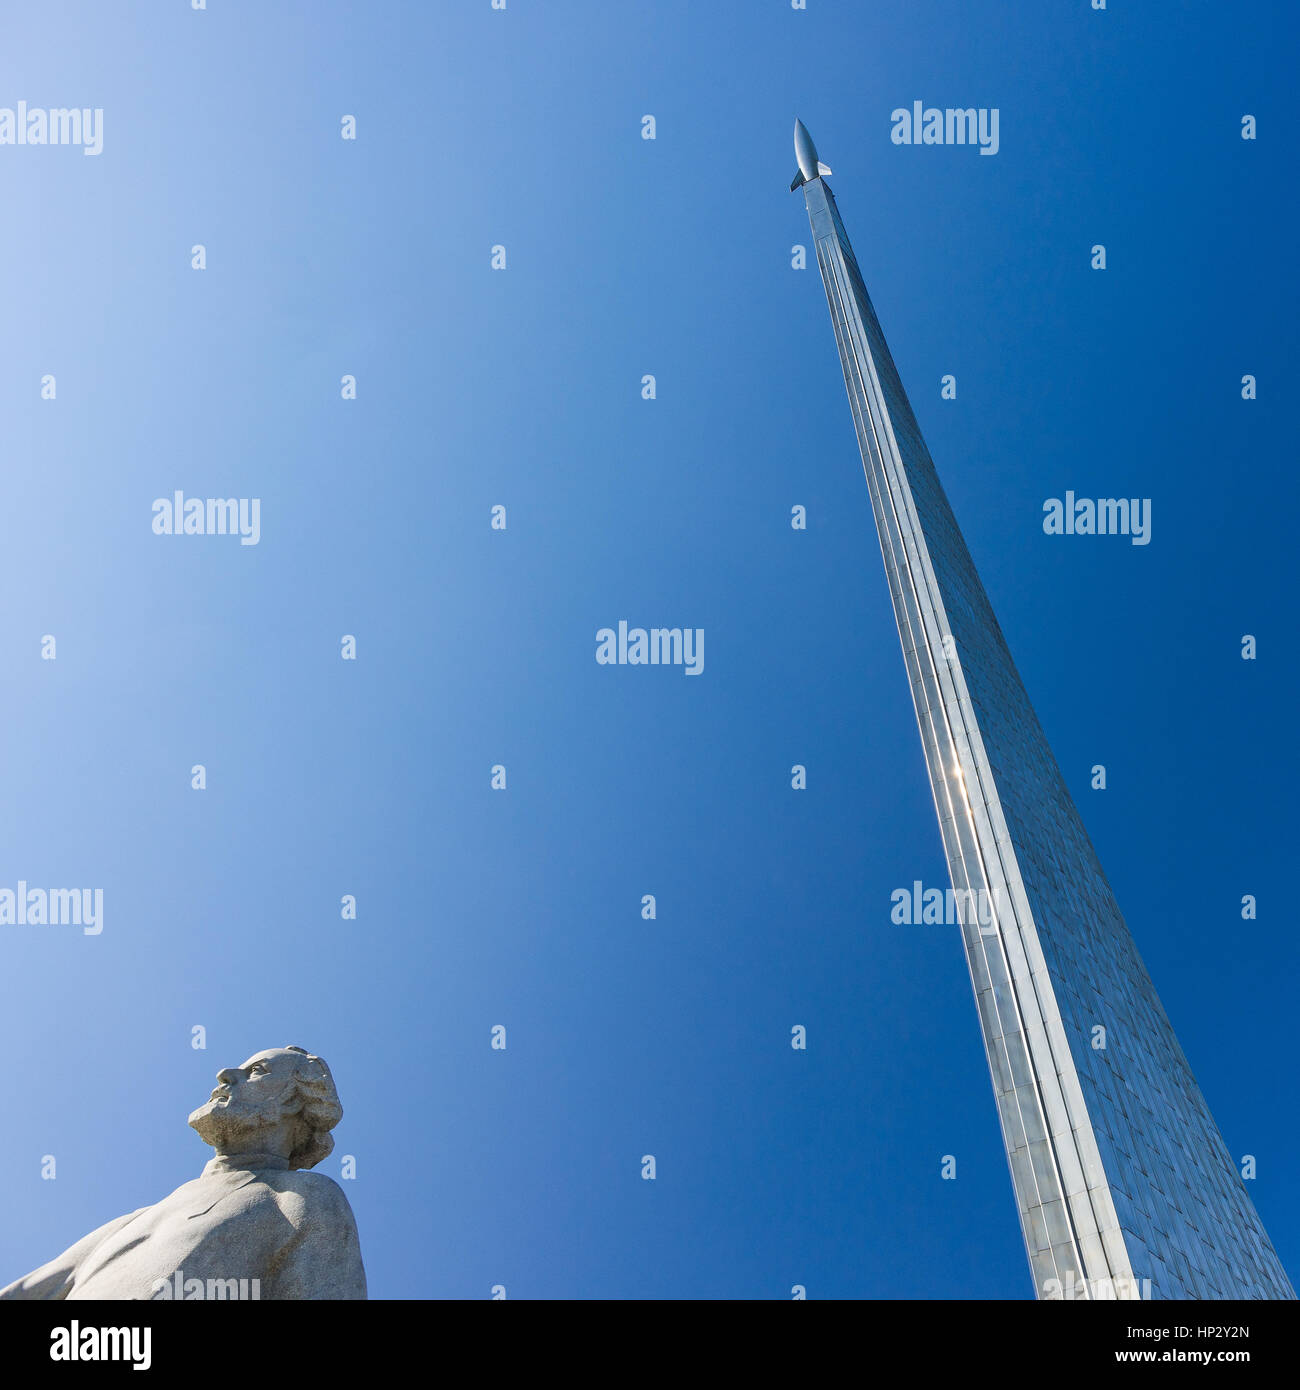 MOSCOW, RUSSIA - May 2, 2013: Details of monuments to the Russian rocket scientist and pioneer of the astronautic theory Konstantin Tsiolkovsky and to Stock Photo